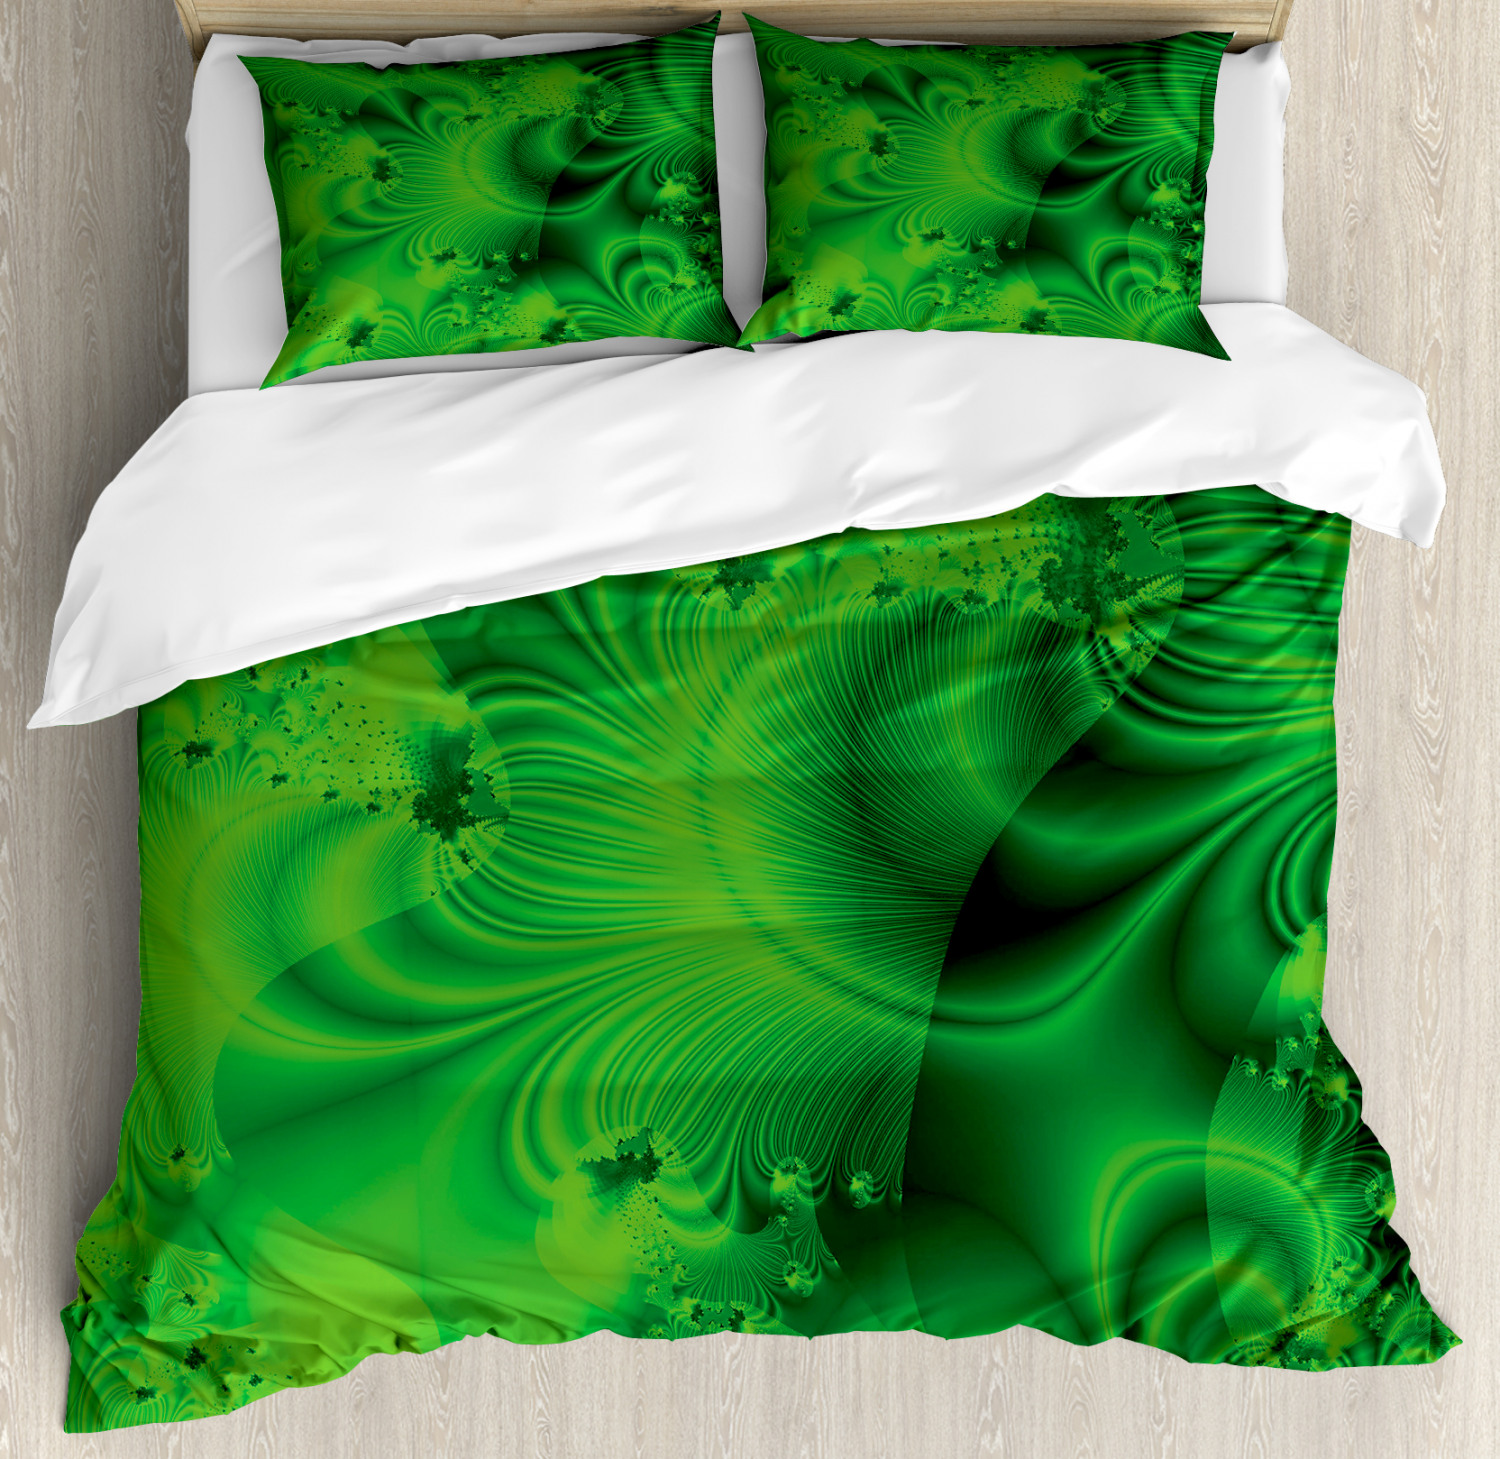 Lime Green Duvet Cover Set With Pillow Shams Vibrant Psychedelic